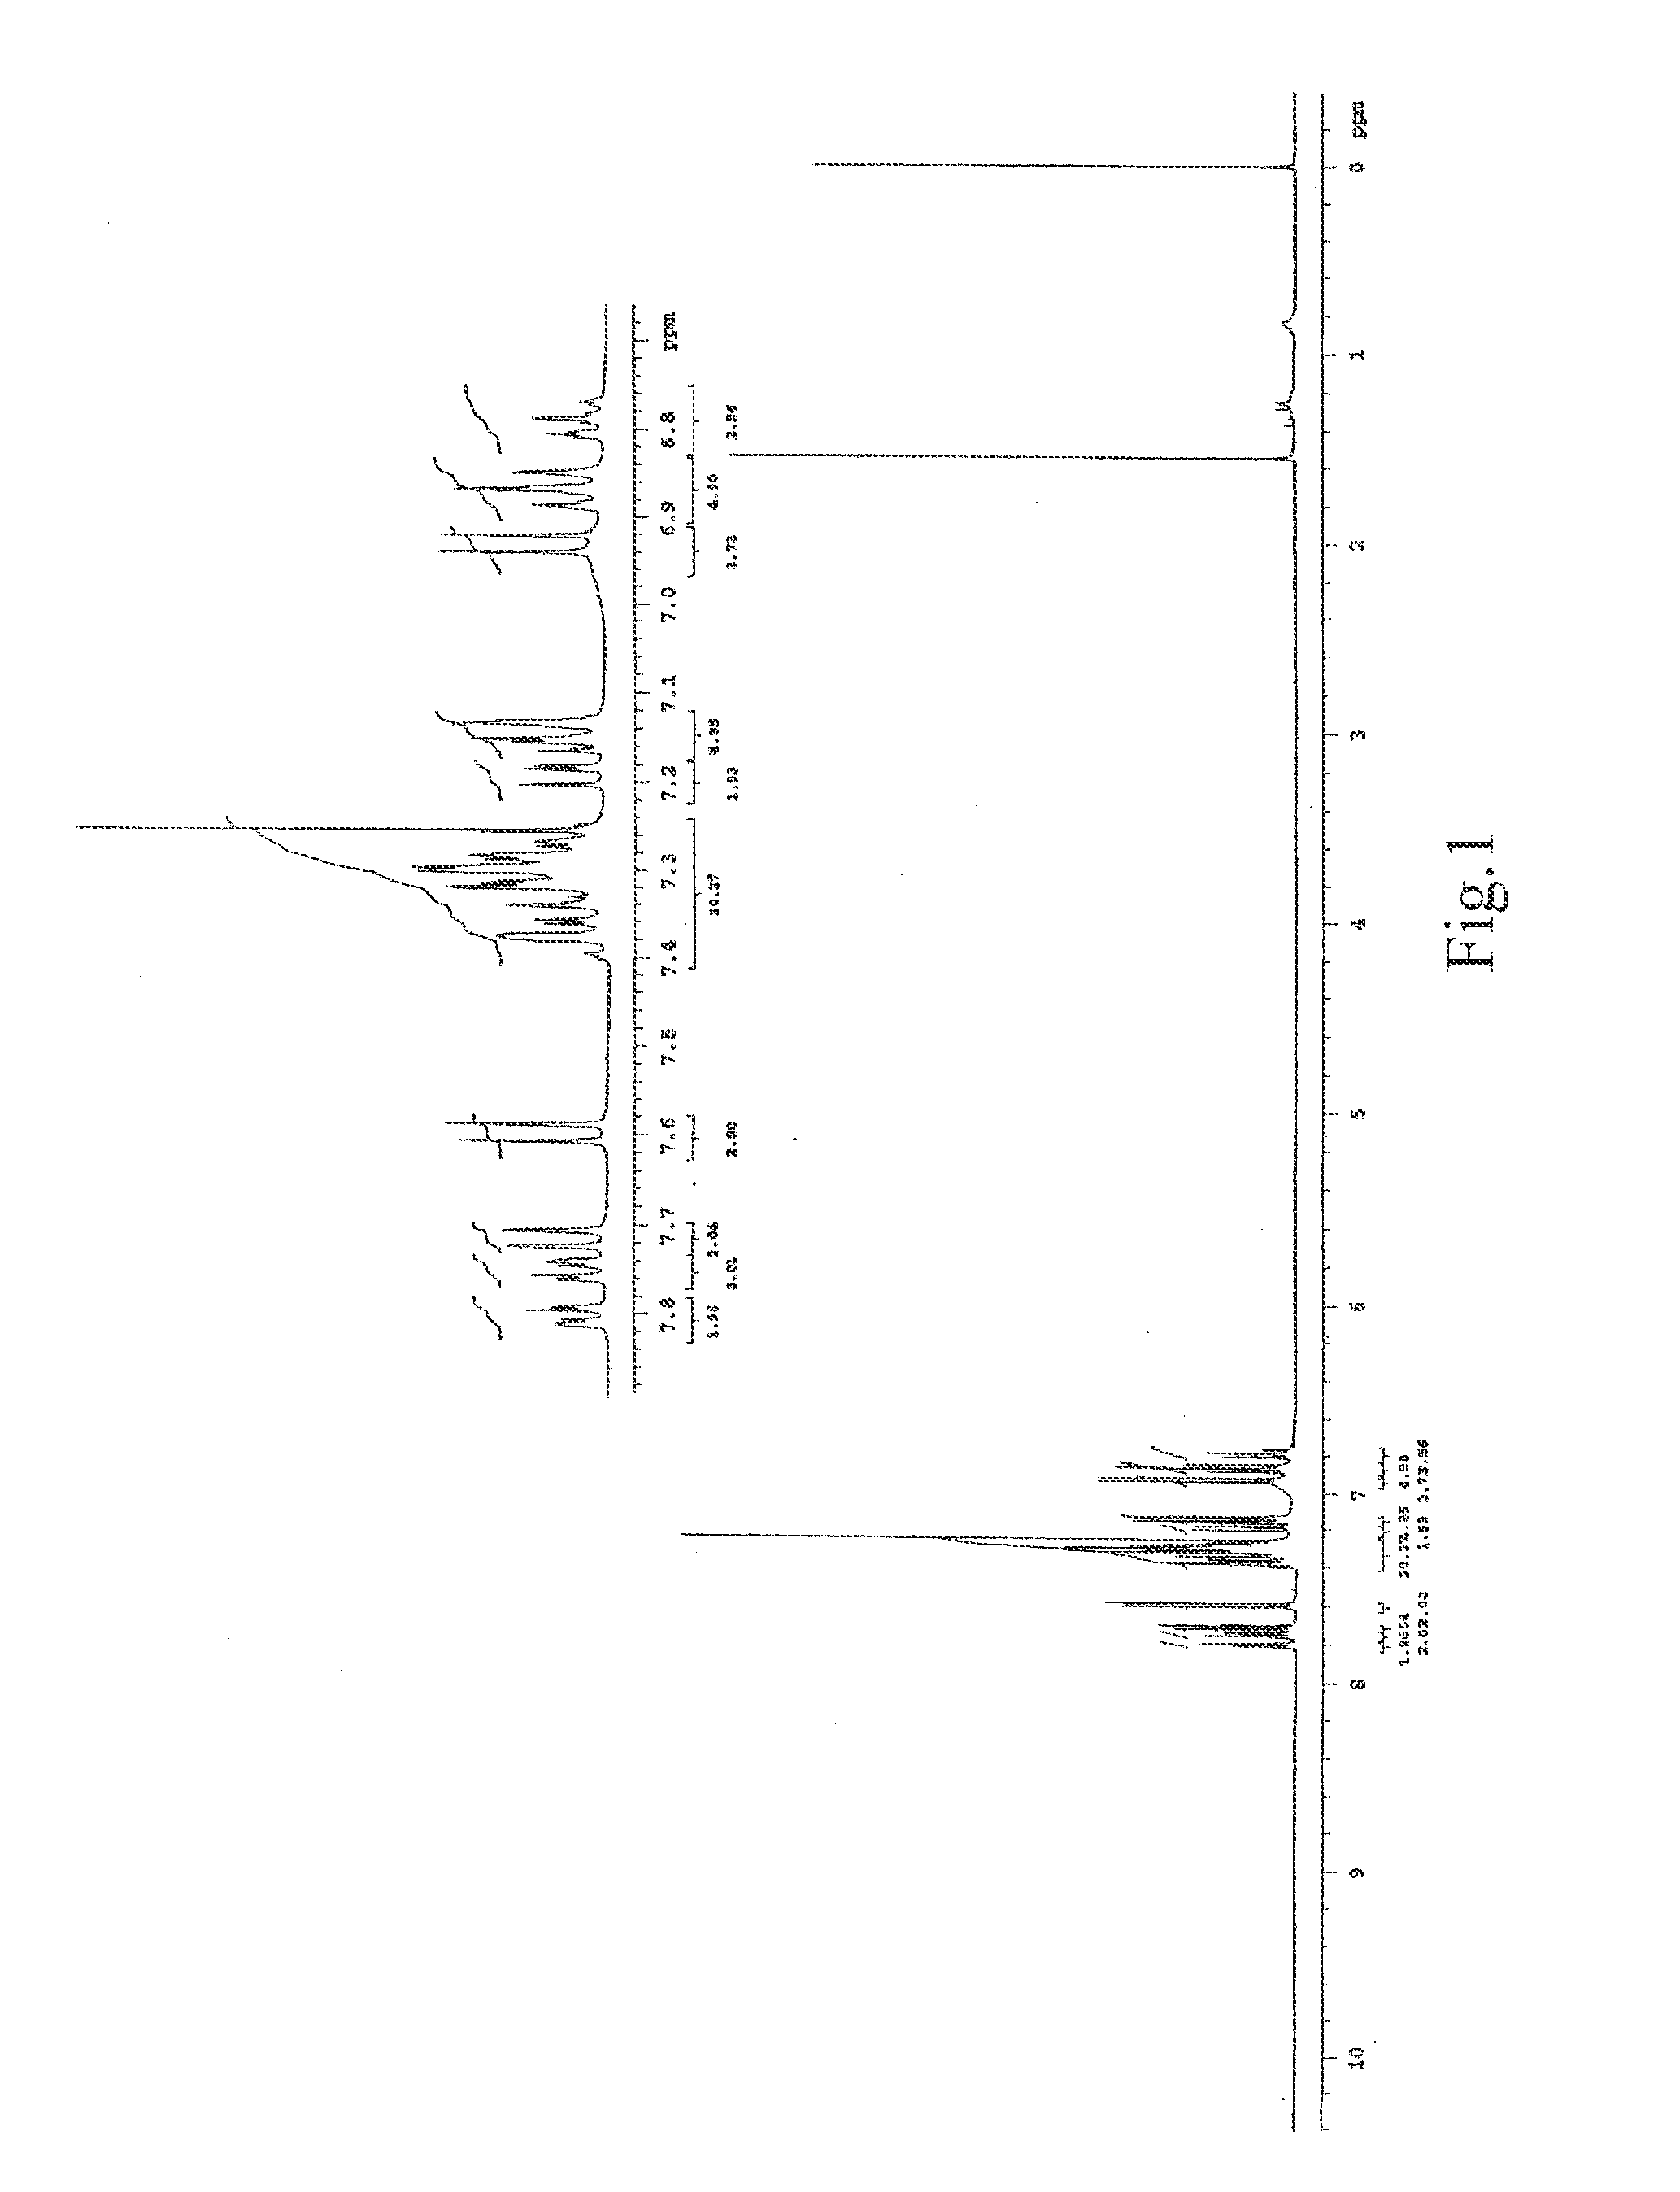 Organic light-emitting material and method for producing an organic material